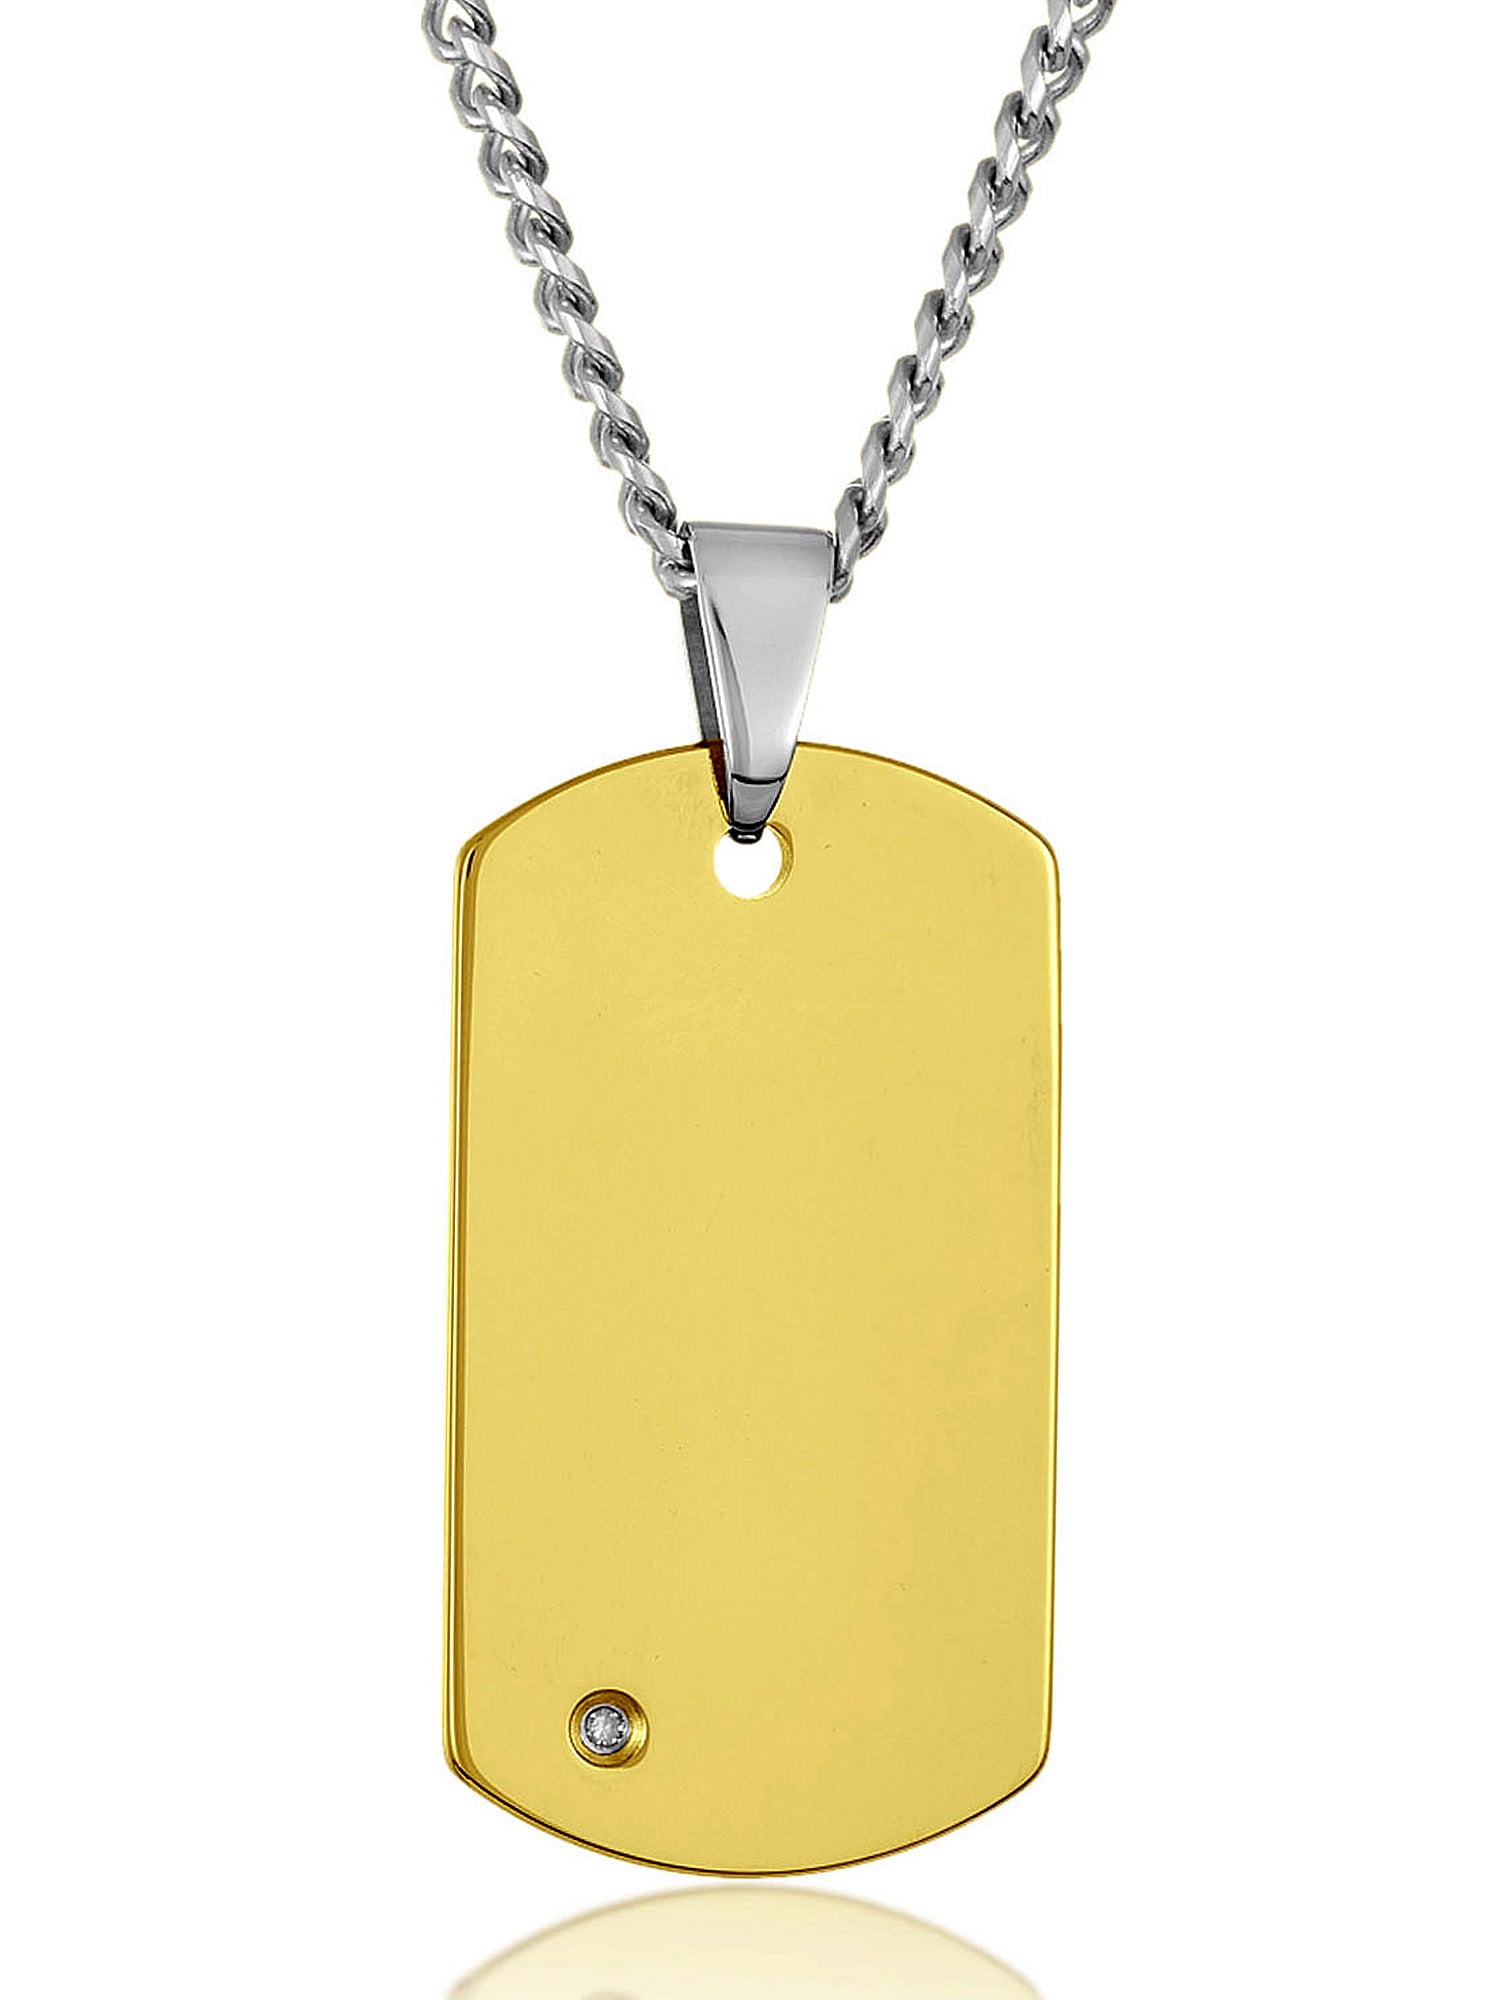 Amazon.com: Dog Tag Necklace For Men